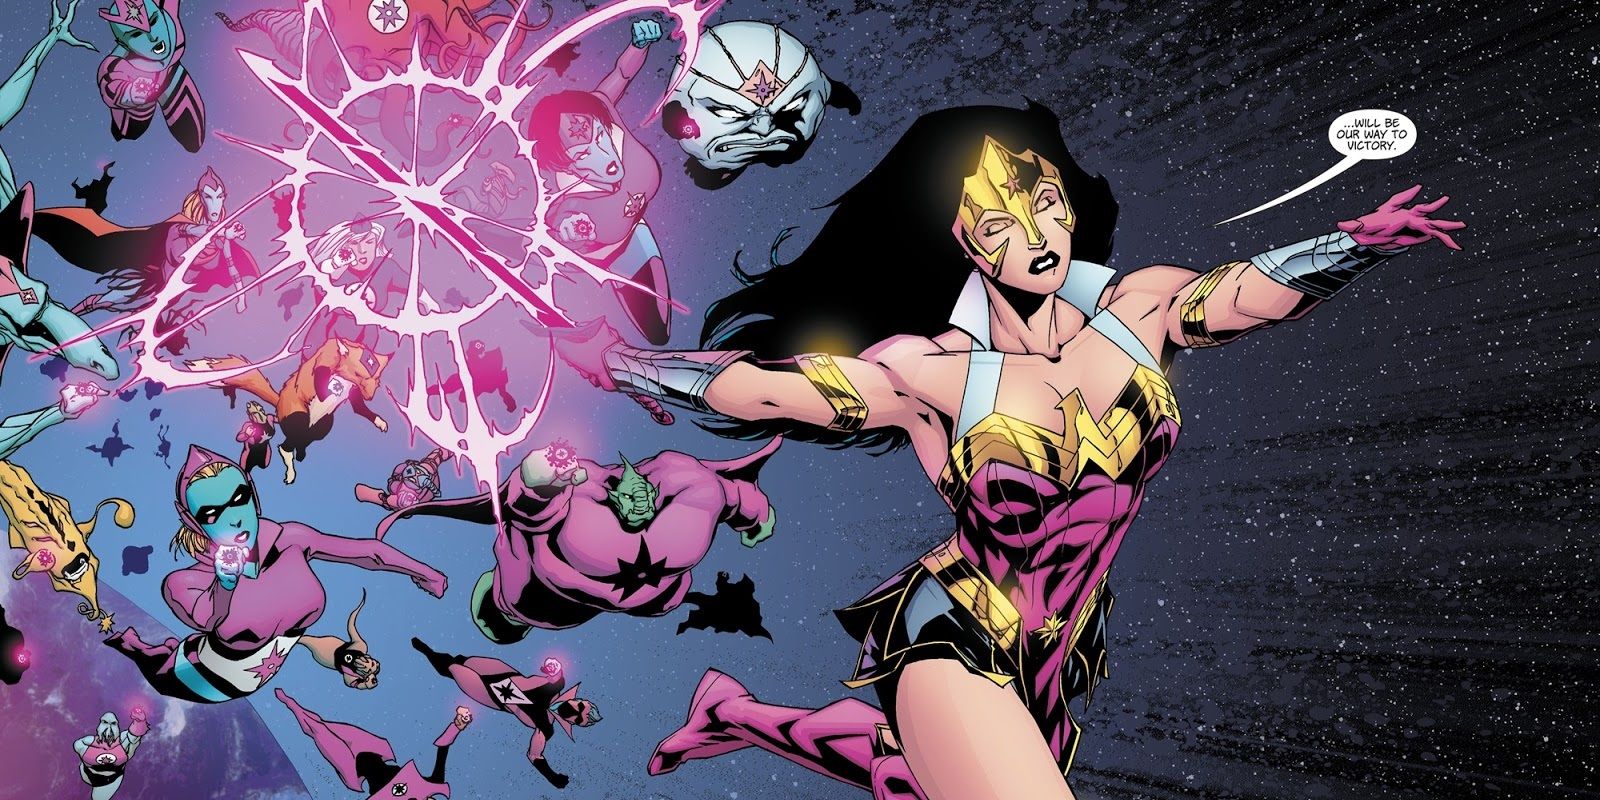 Wonder Woman Star Sapphire Corps male and female